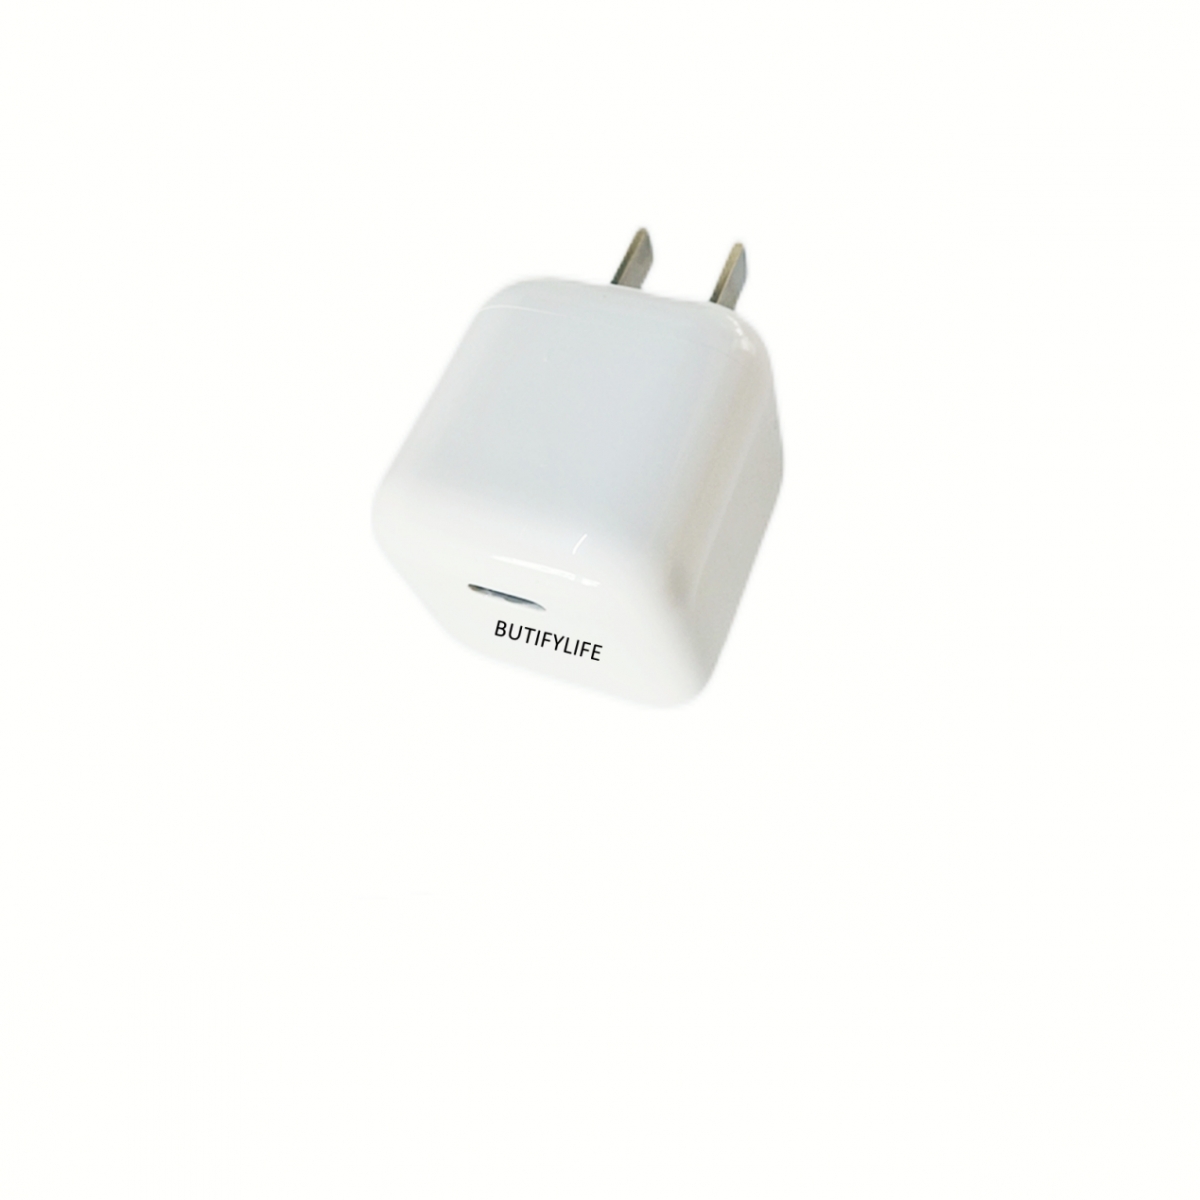 Why 0.5 amp usb wall charger-BUTIFYLIFE-Server Adapter, Apple Pencial